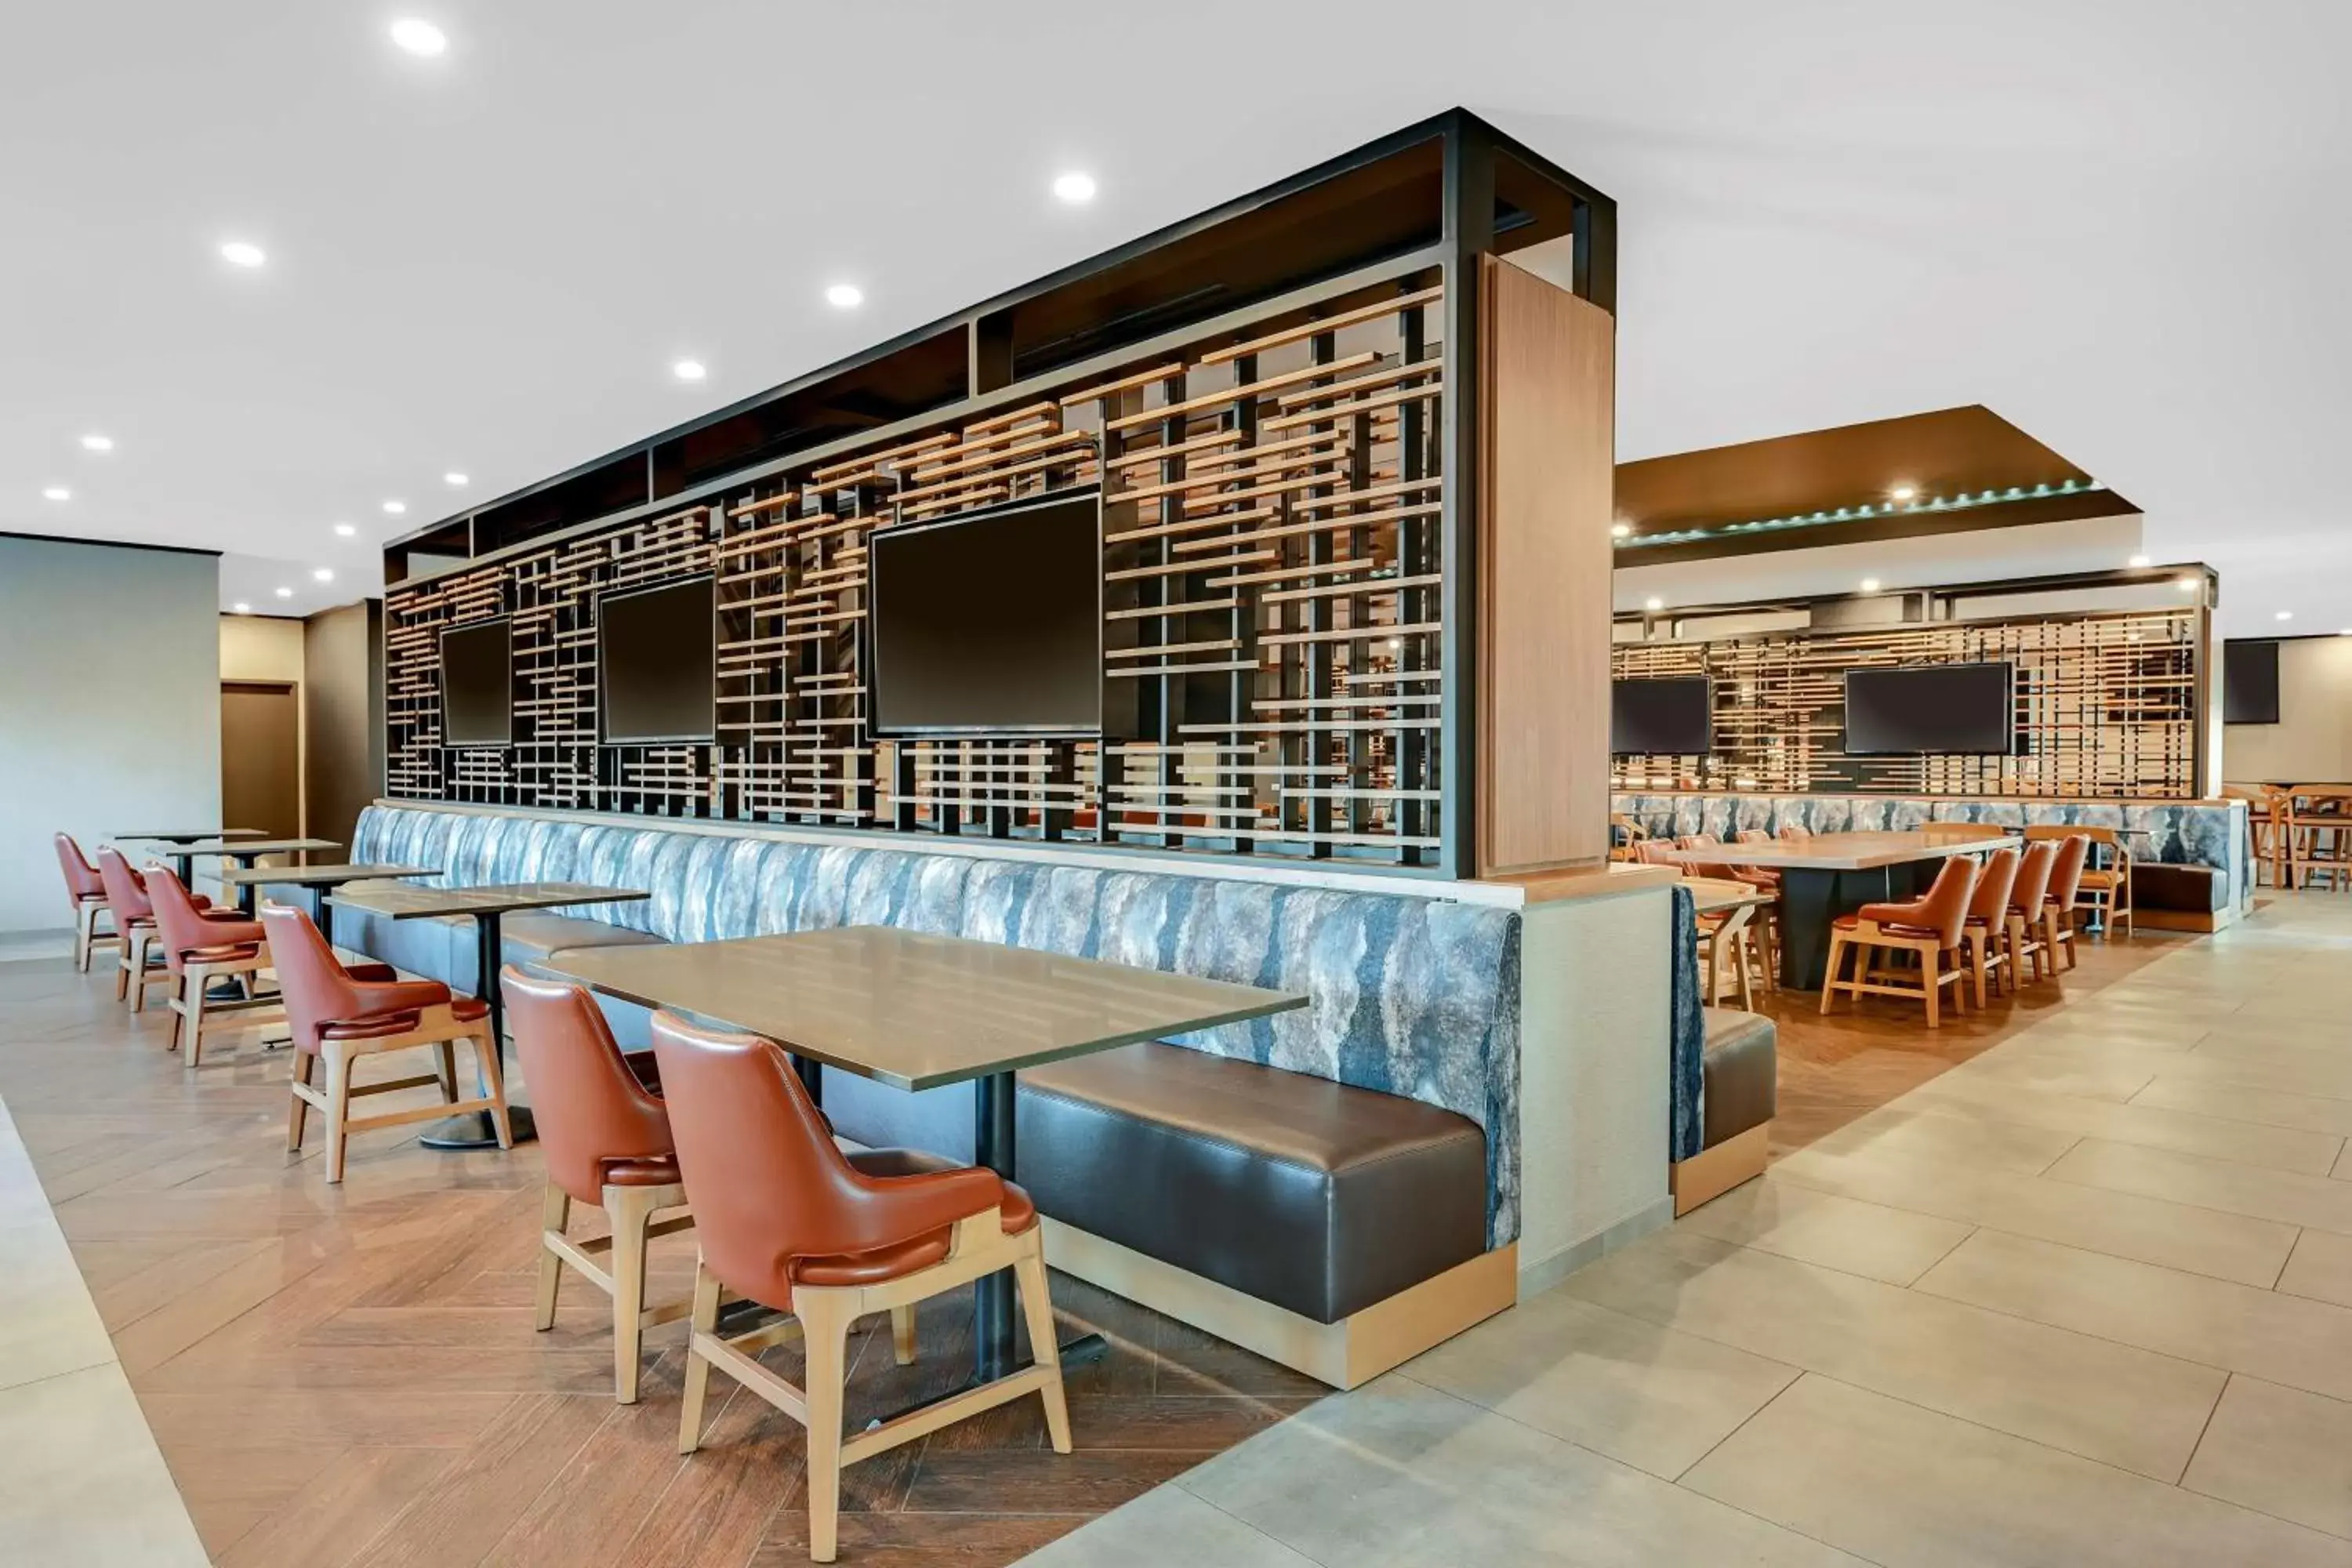 Dining area, Lounge/Bar in DoubleTree by Hilton Denver International Airport, CO